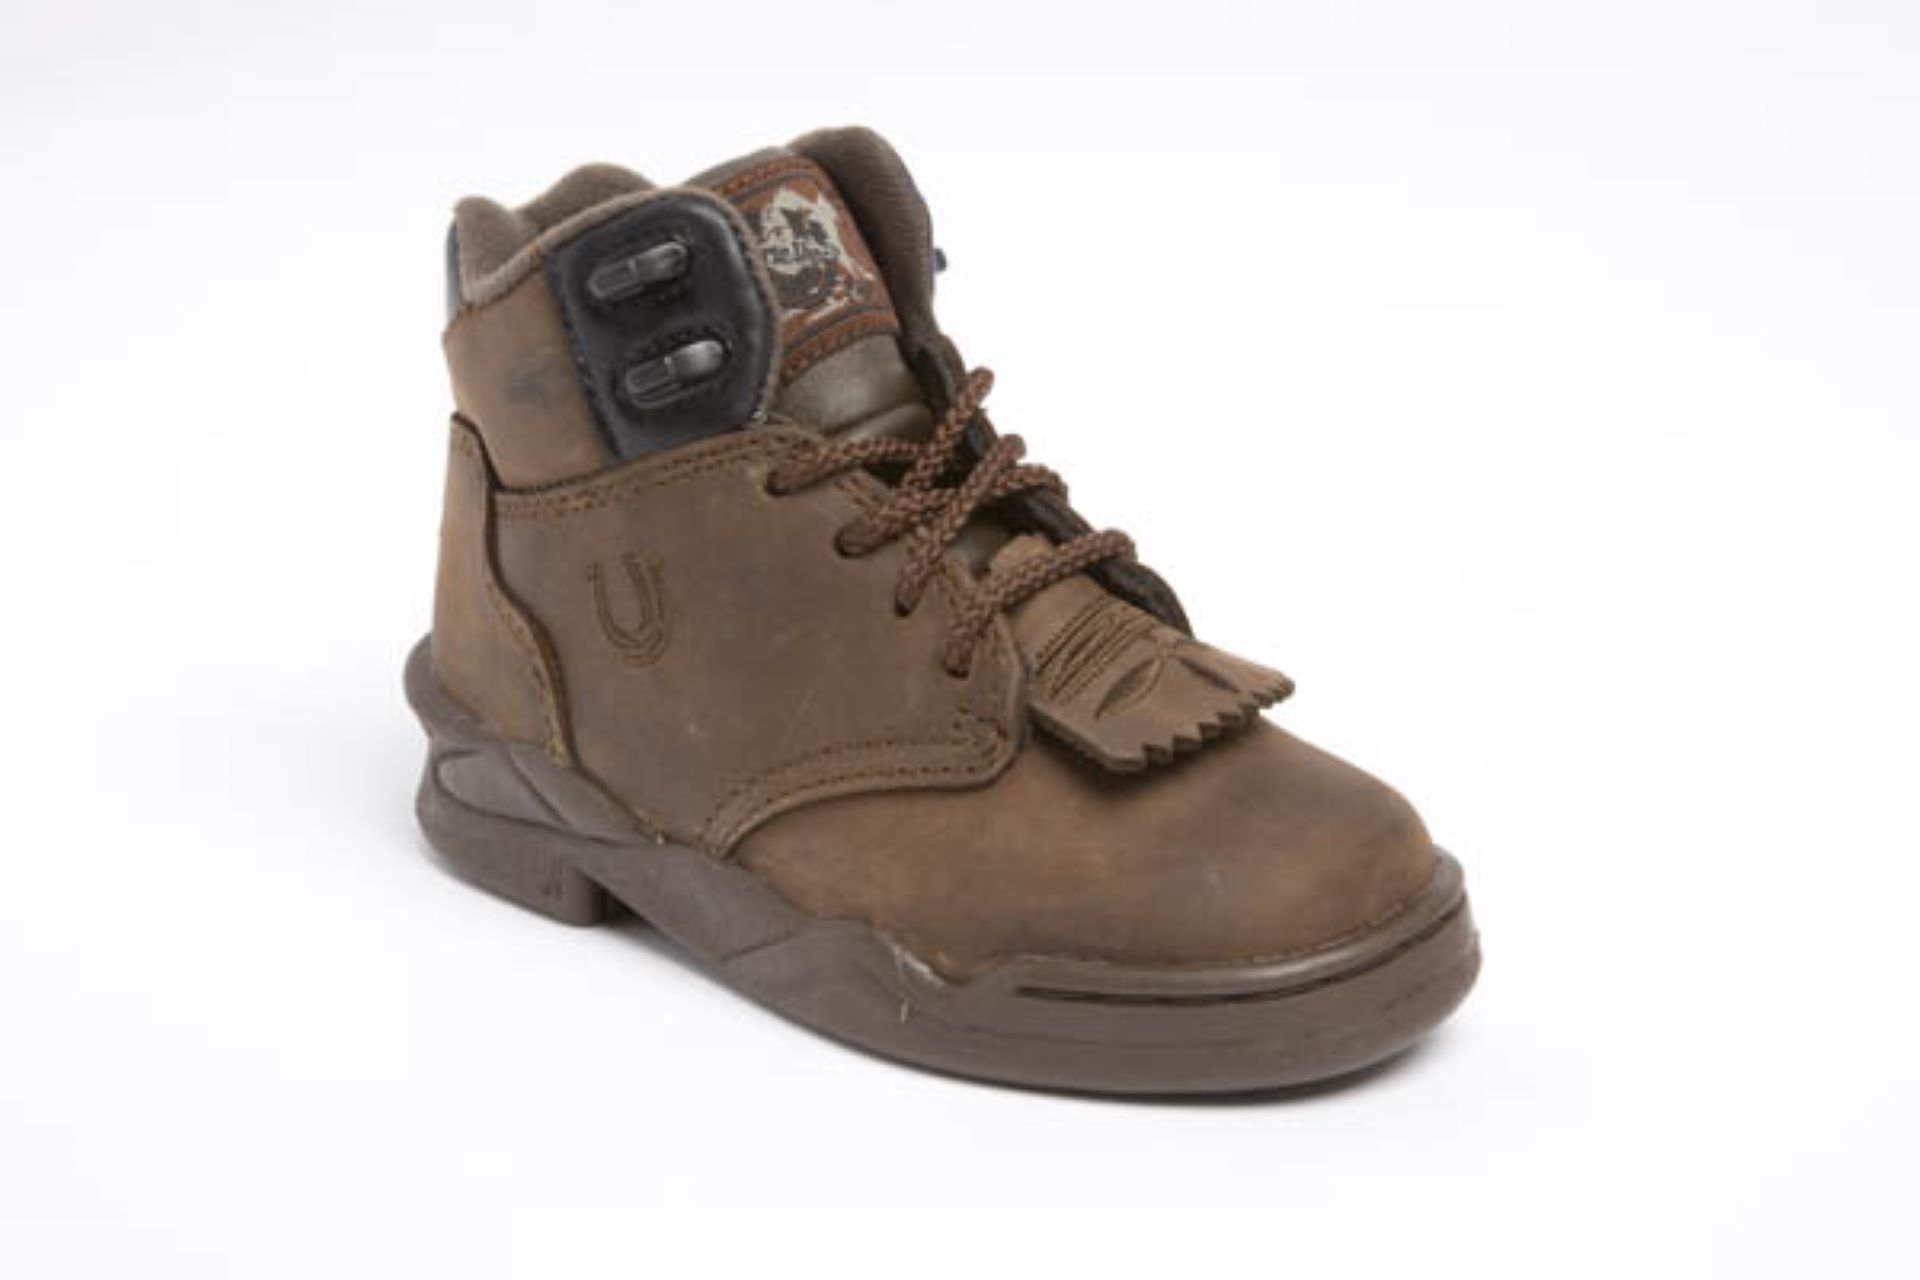 Ladies Leather Hiker with Kiltie - Chocolate Chip Brown